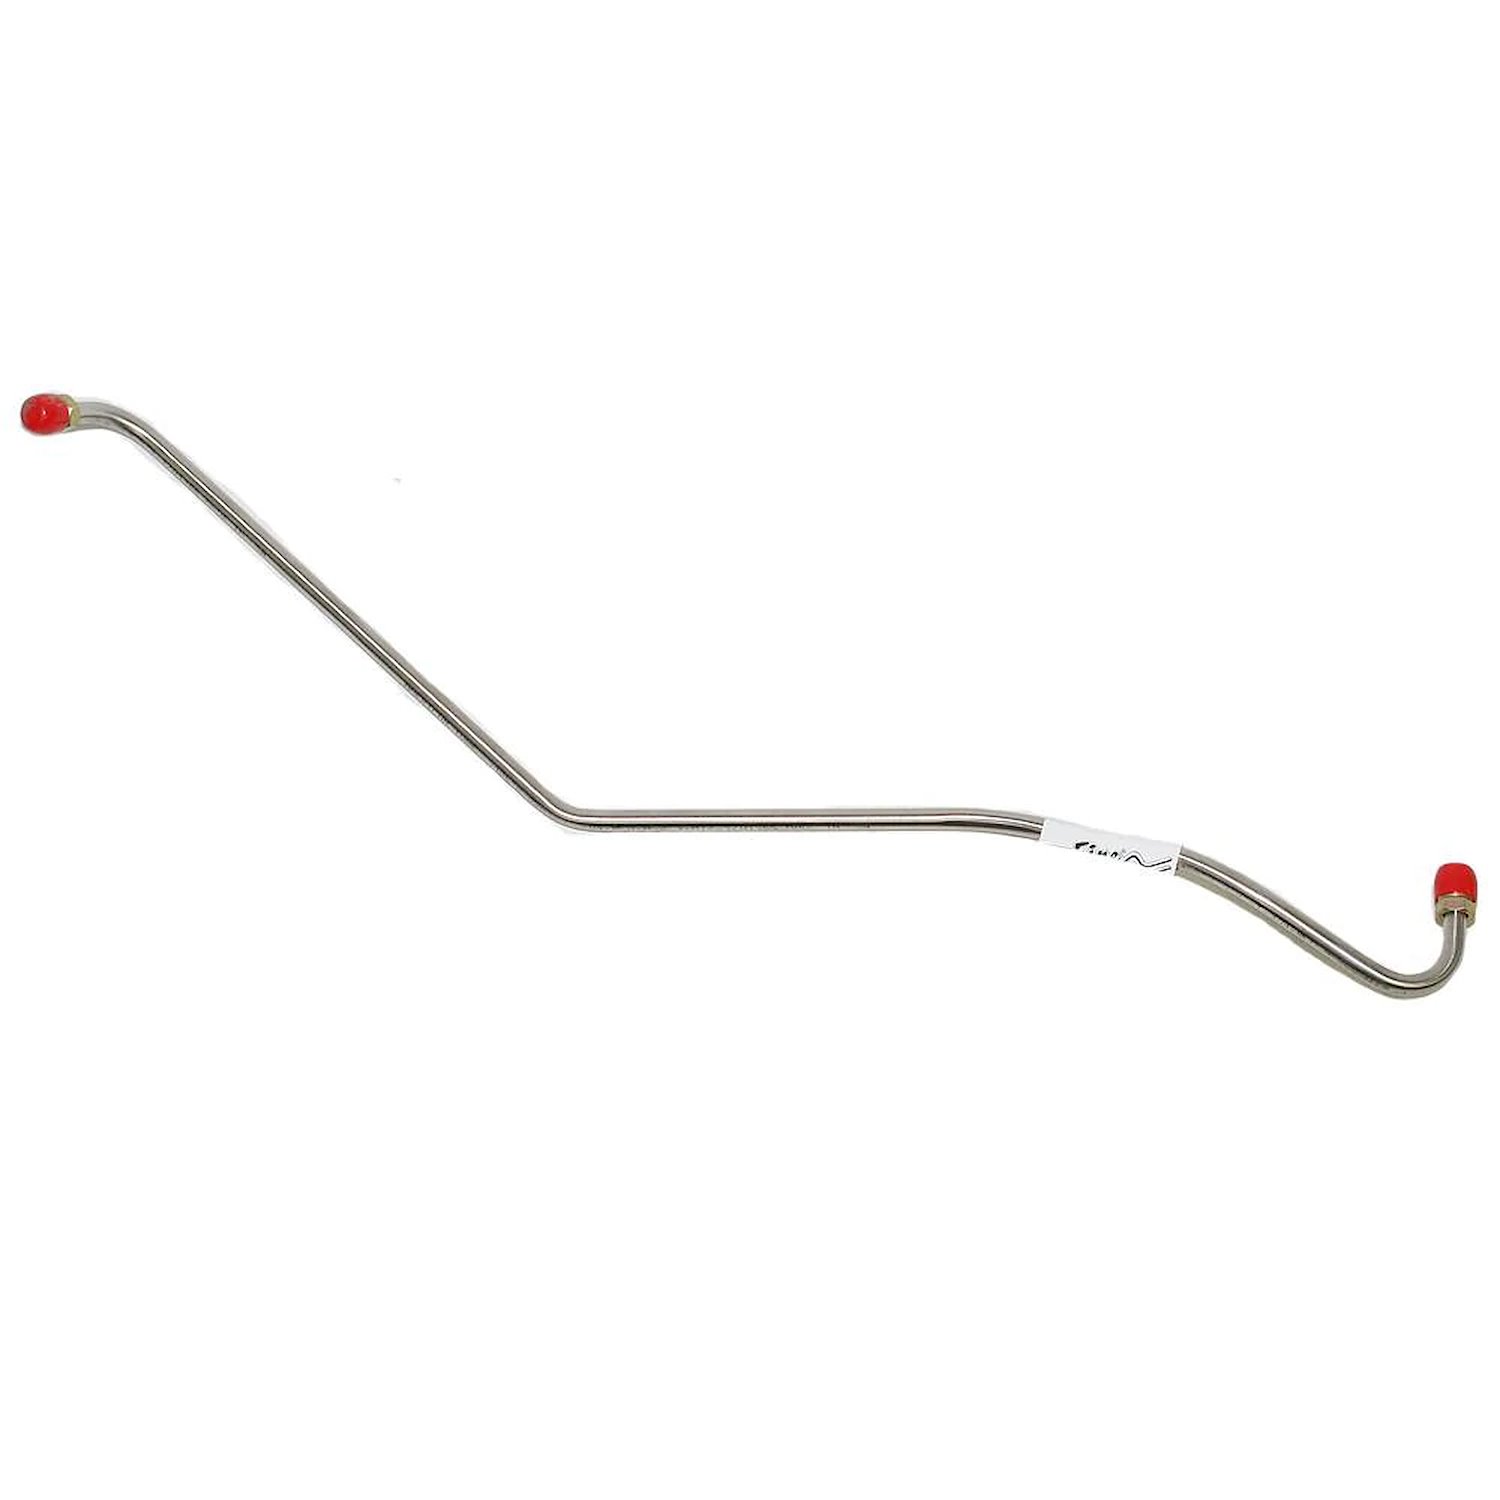 Fuel Line, Fuel Pump to Carburetor for Select 1965 Chevrolet Models with 283 2-bbl Engine [Stainless Steel]